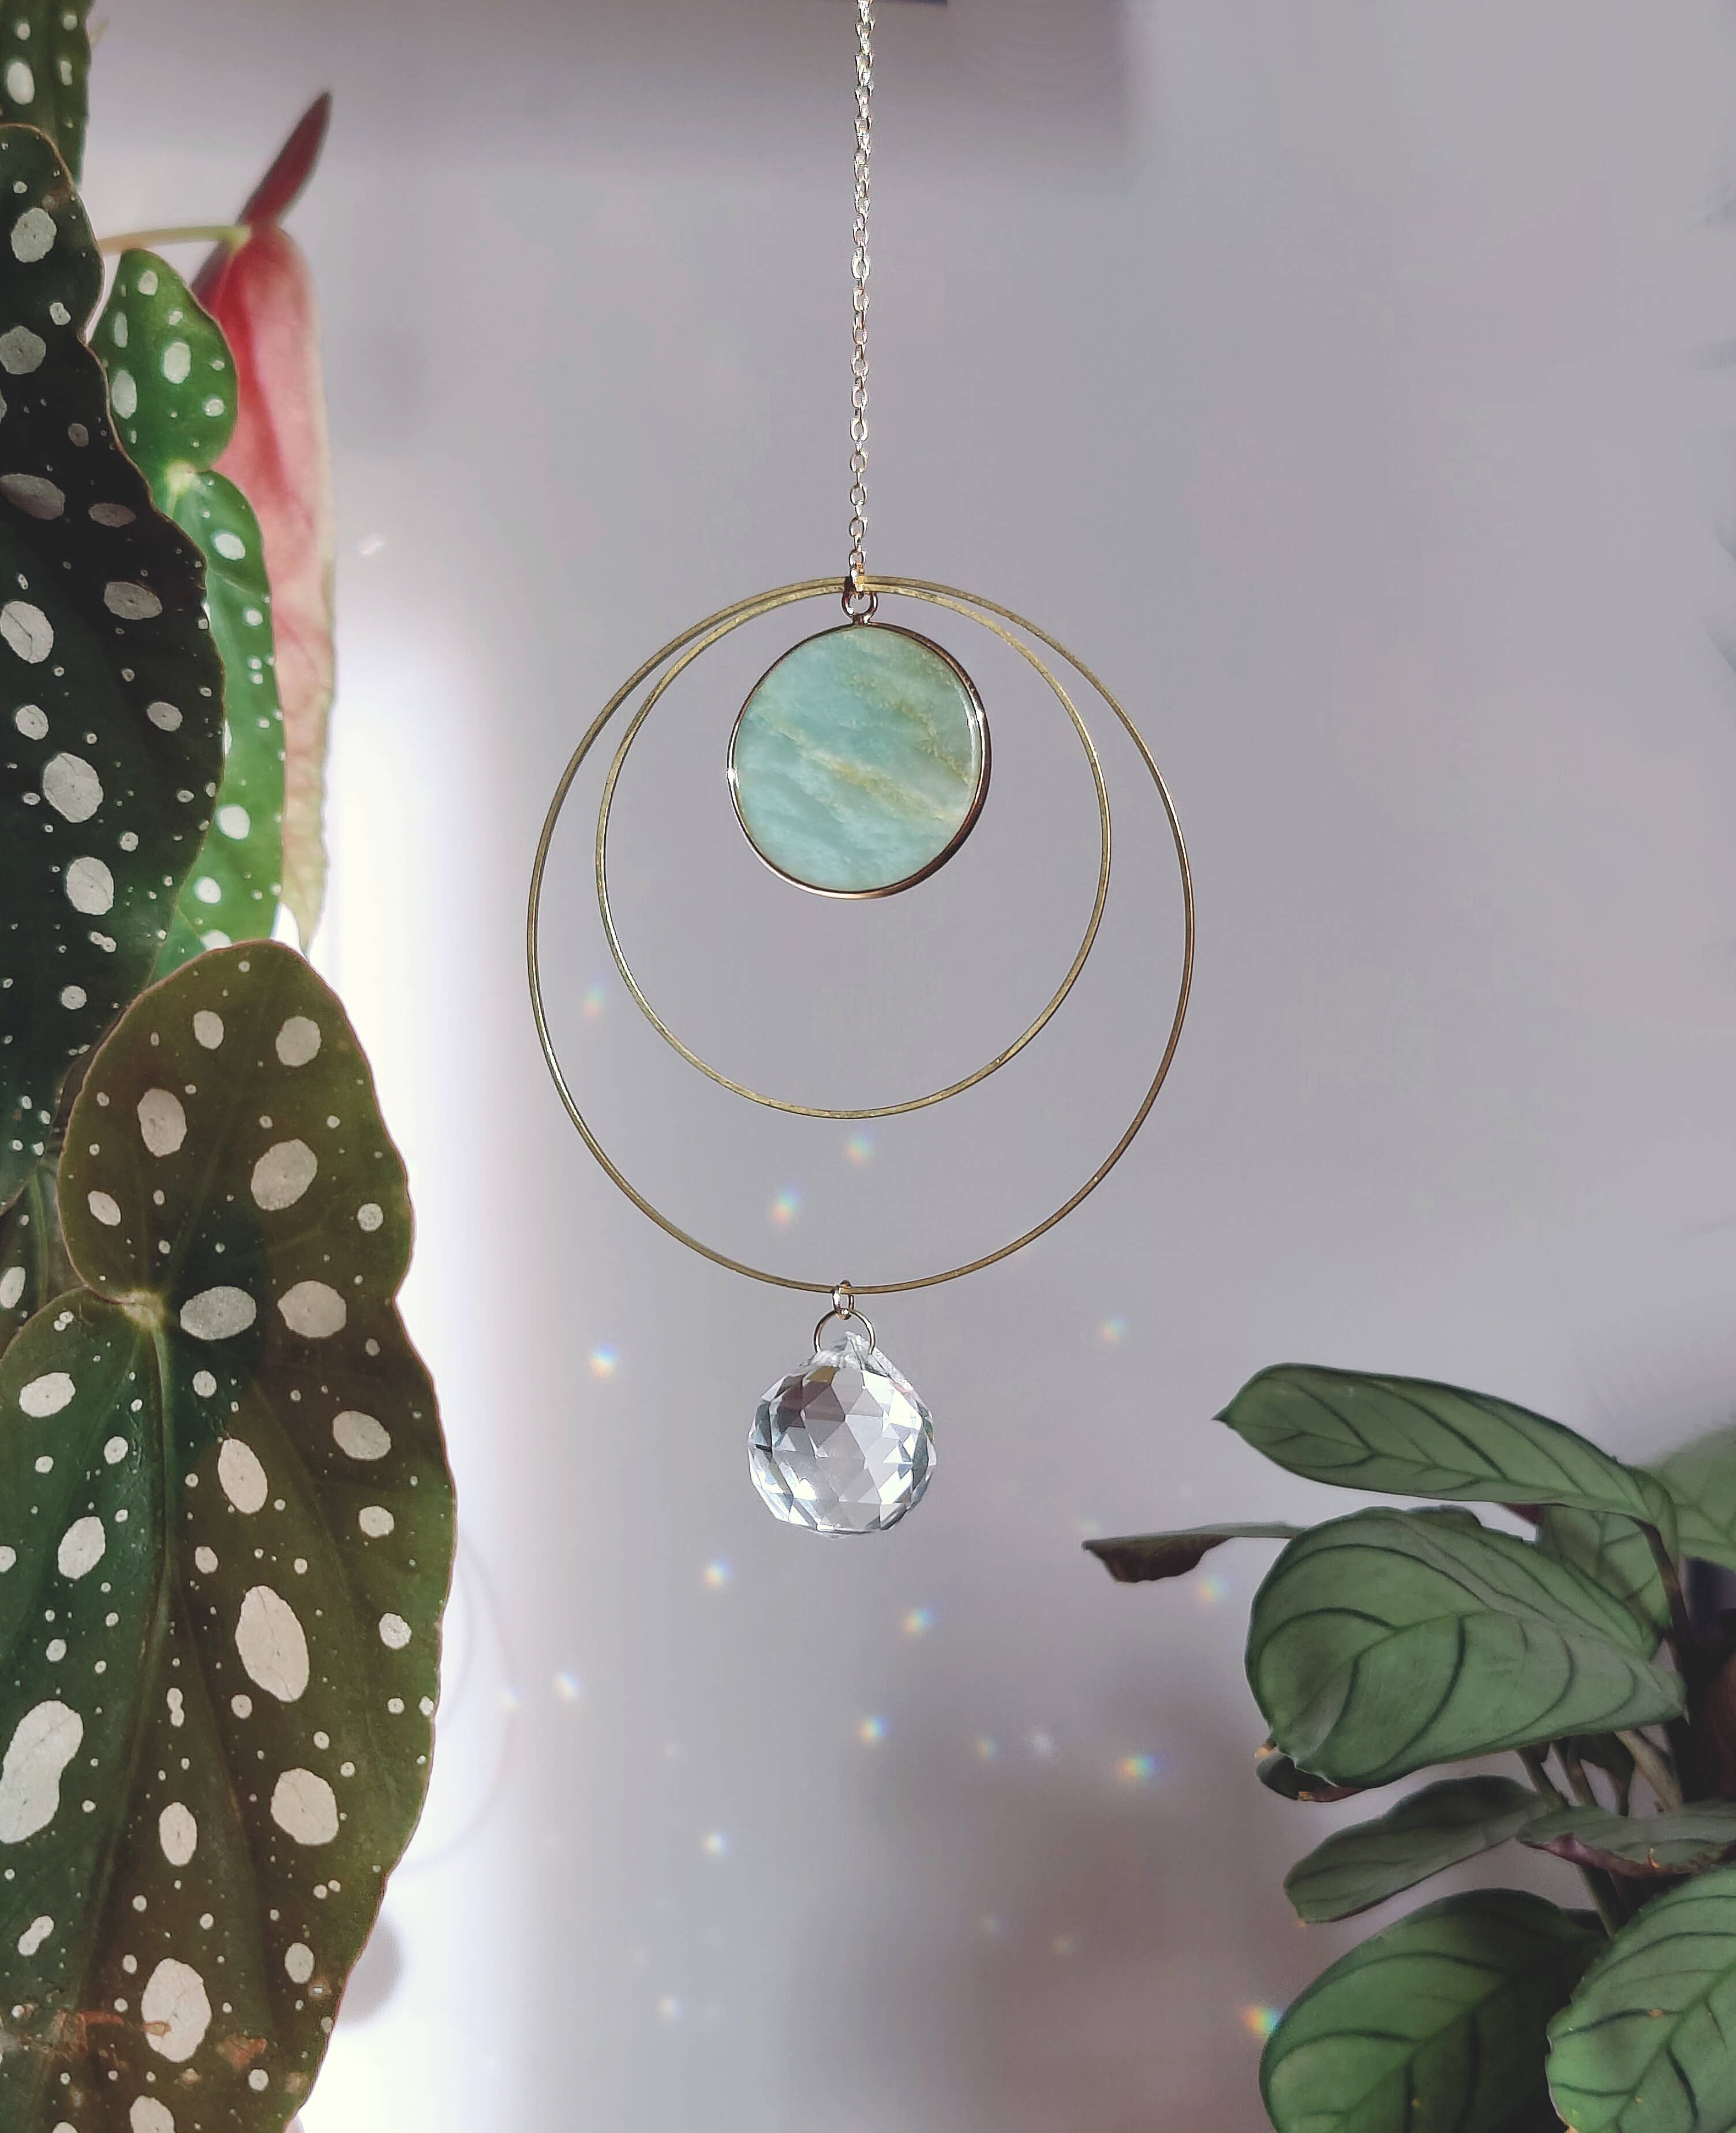 Buy wholesale Suncatcher MIDDAY, Crystal and brass sun catcher, Minimalist  and Bohemian decoration, Celestial and Magical hanging mobile